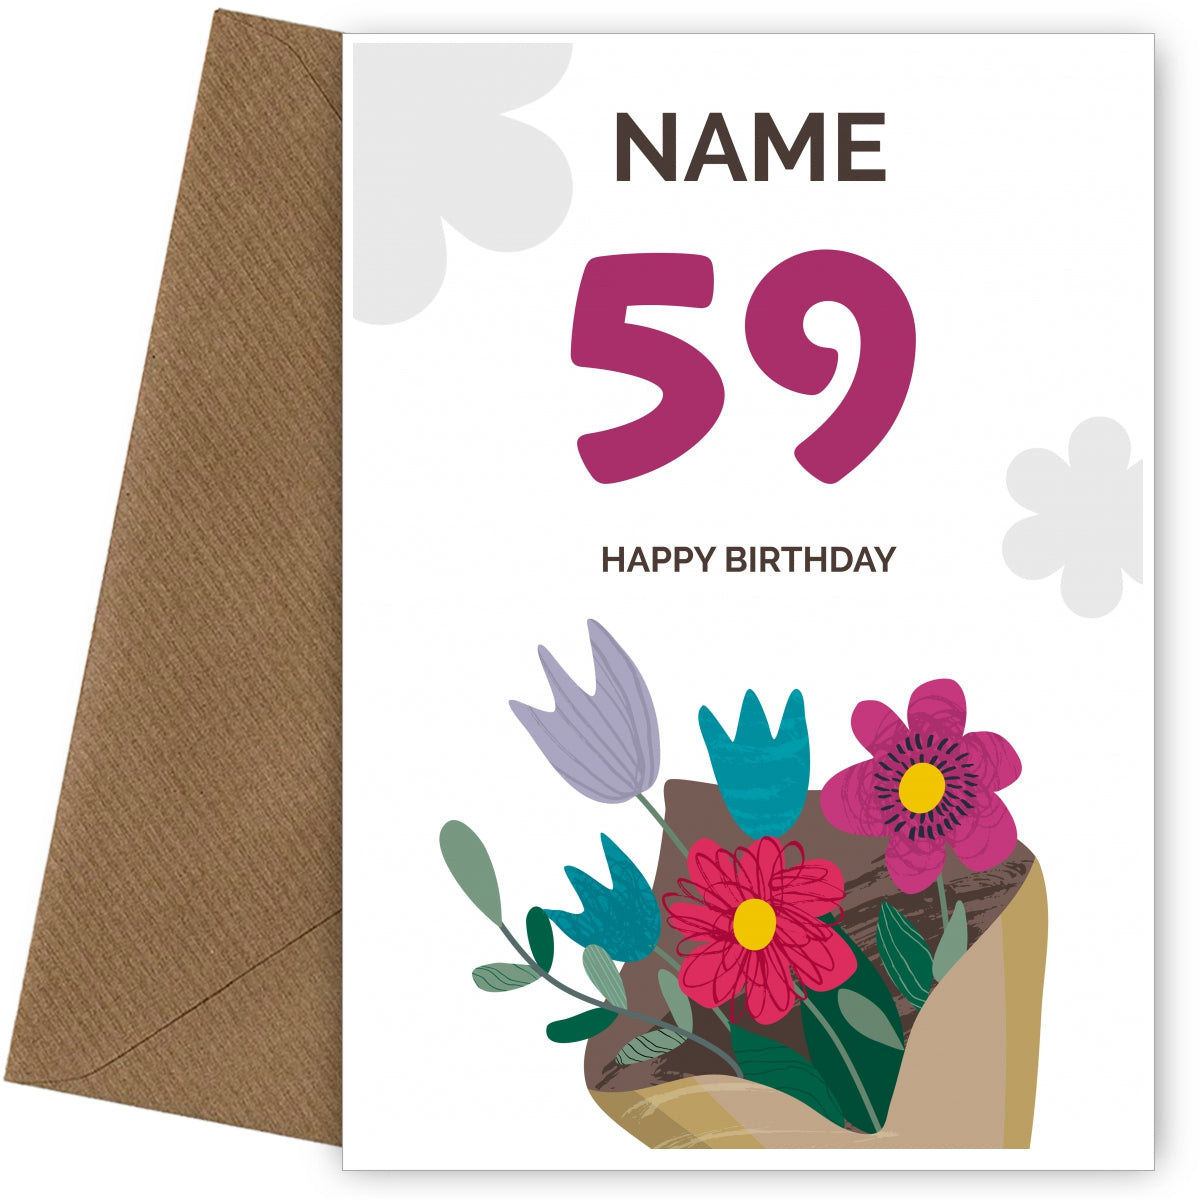 Happy 59th Birthday Card - Bouquet of Flowers